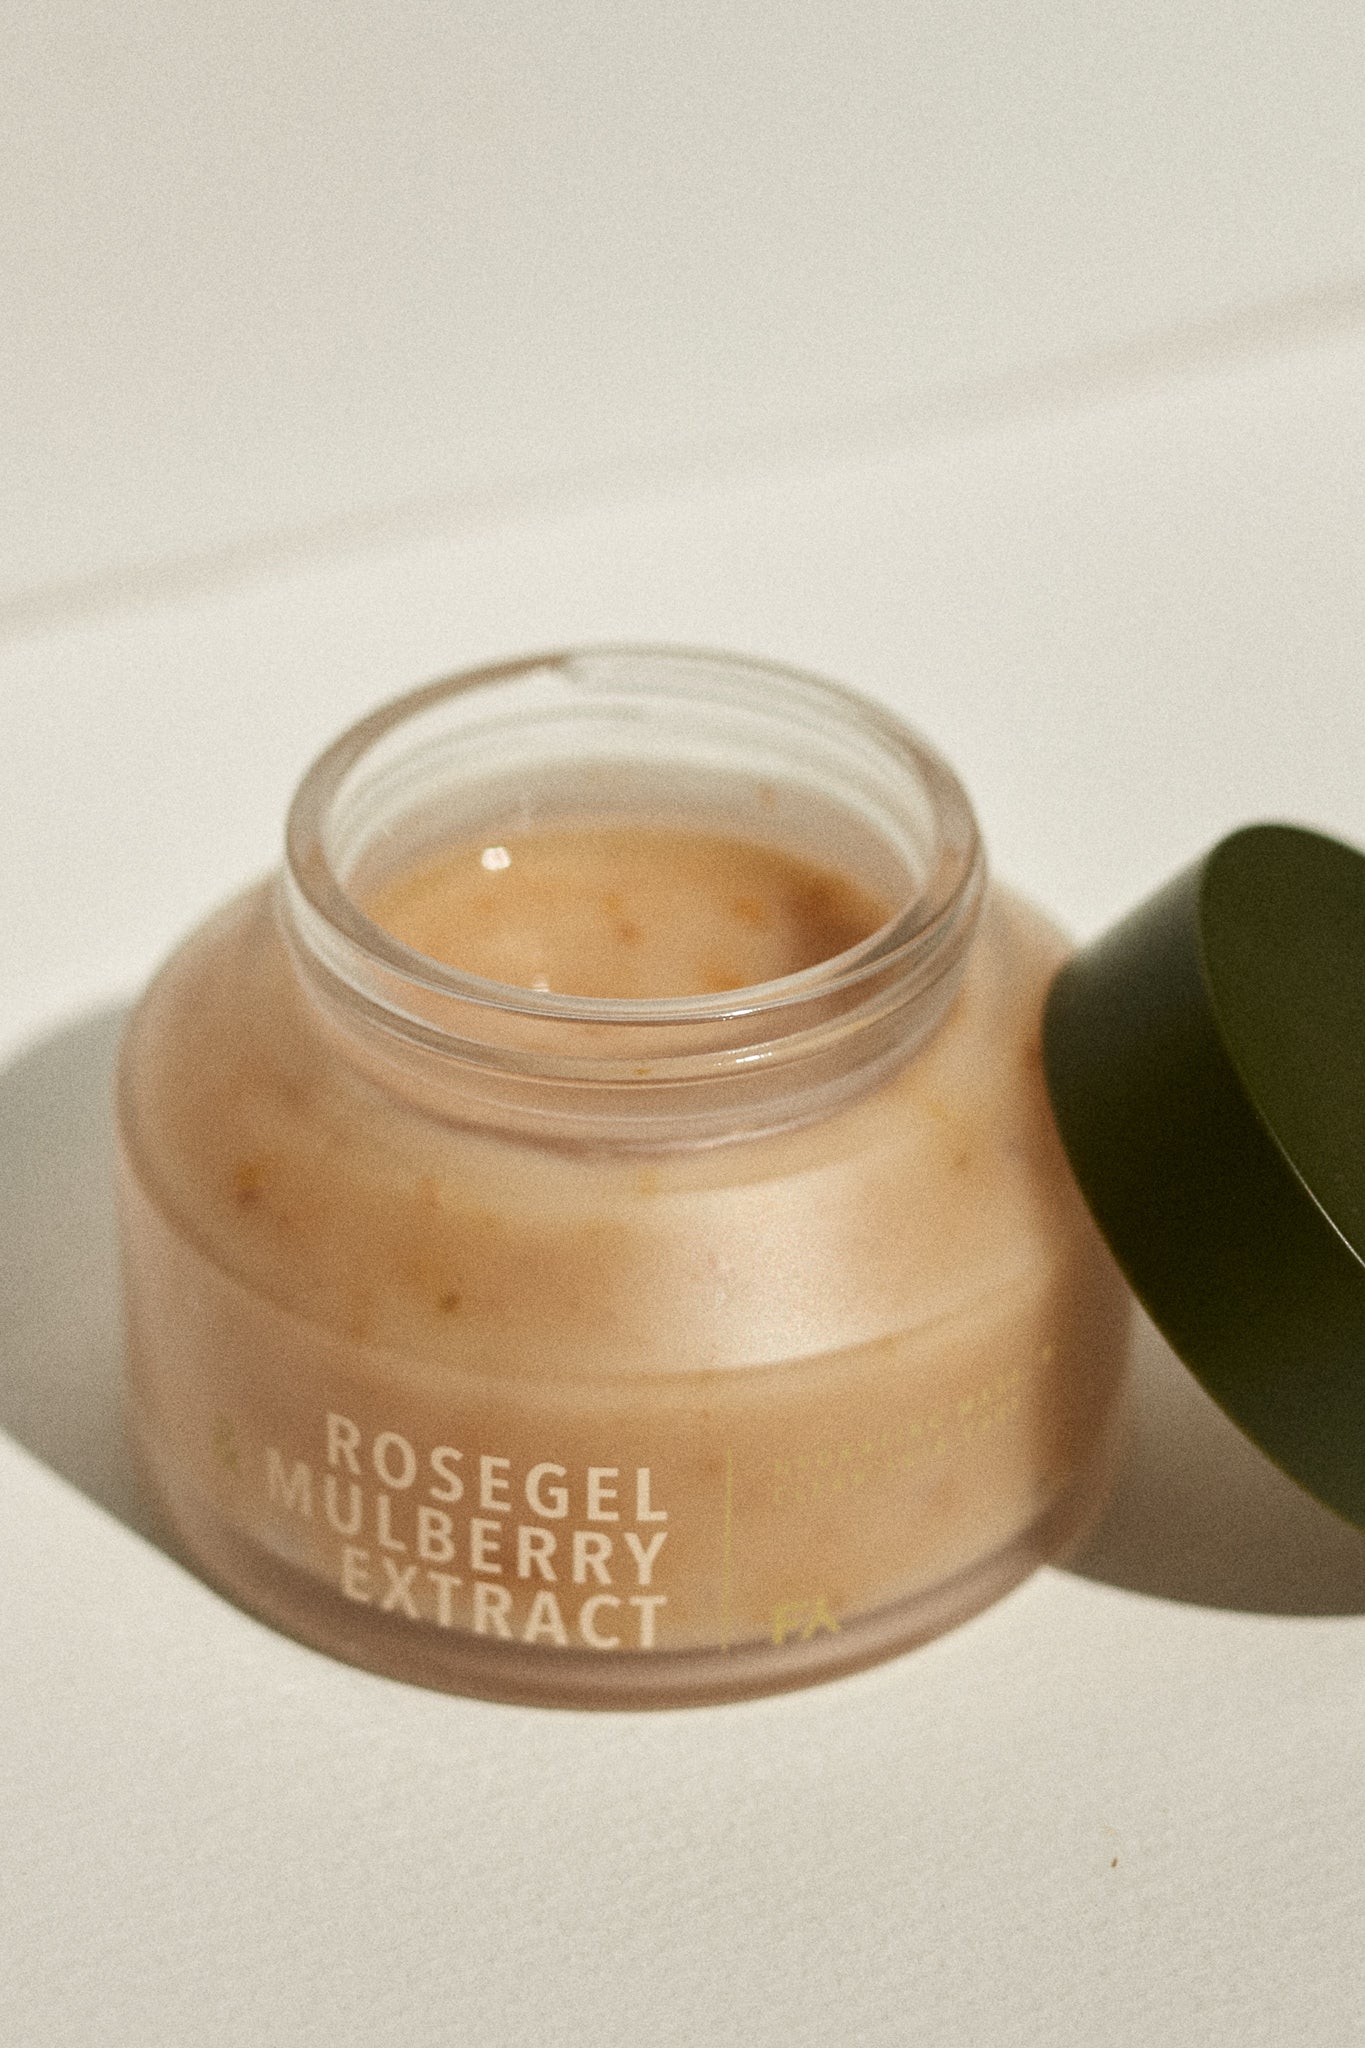 Still life photograph of the Rosegle & Mulberry Extract hydrating face mask by Fields of Yarrow jar with the lid open